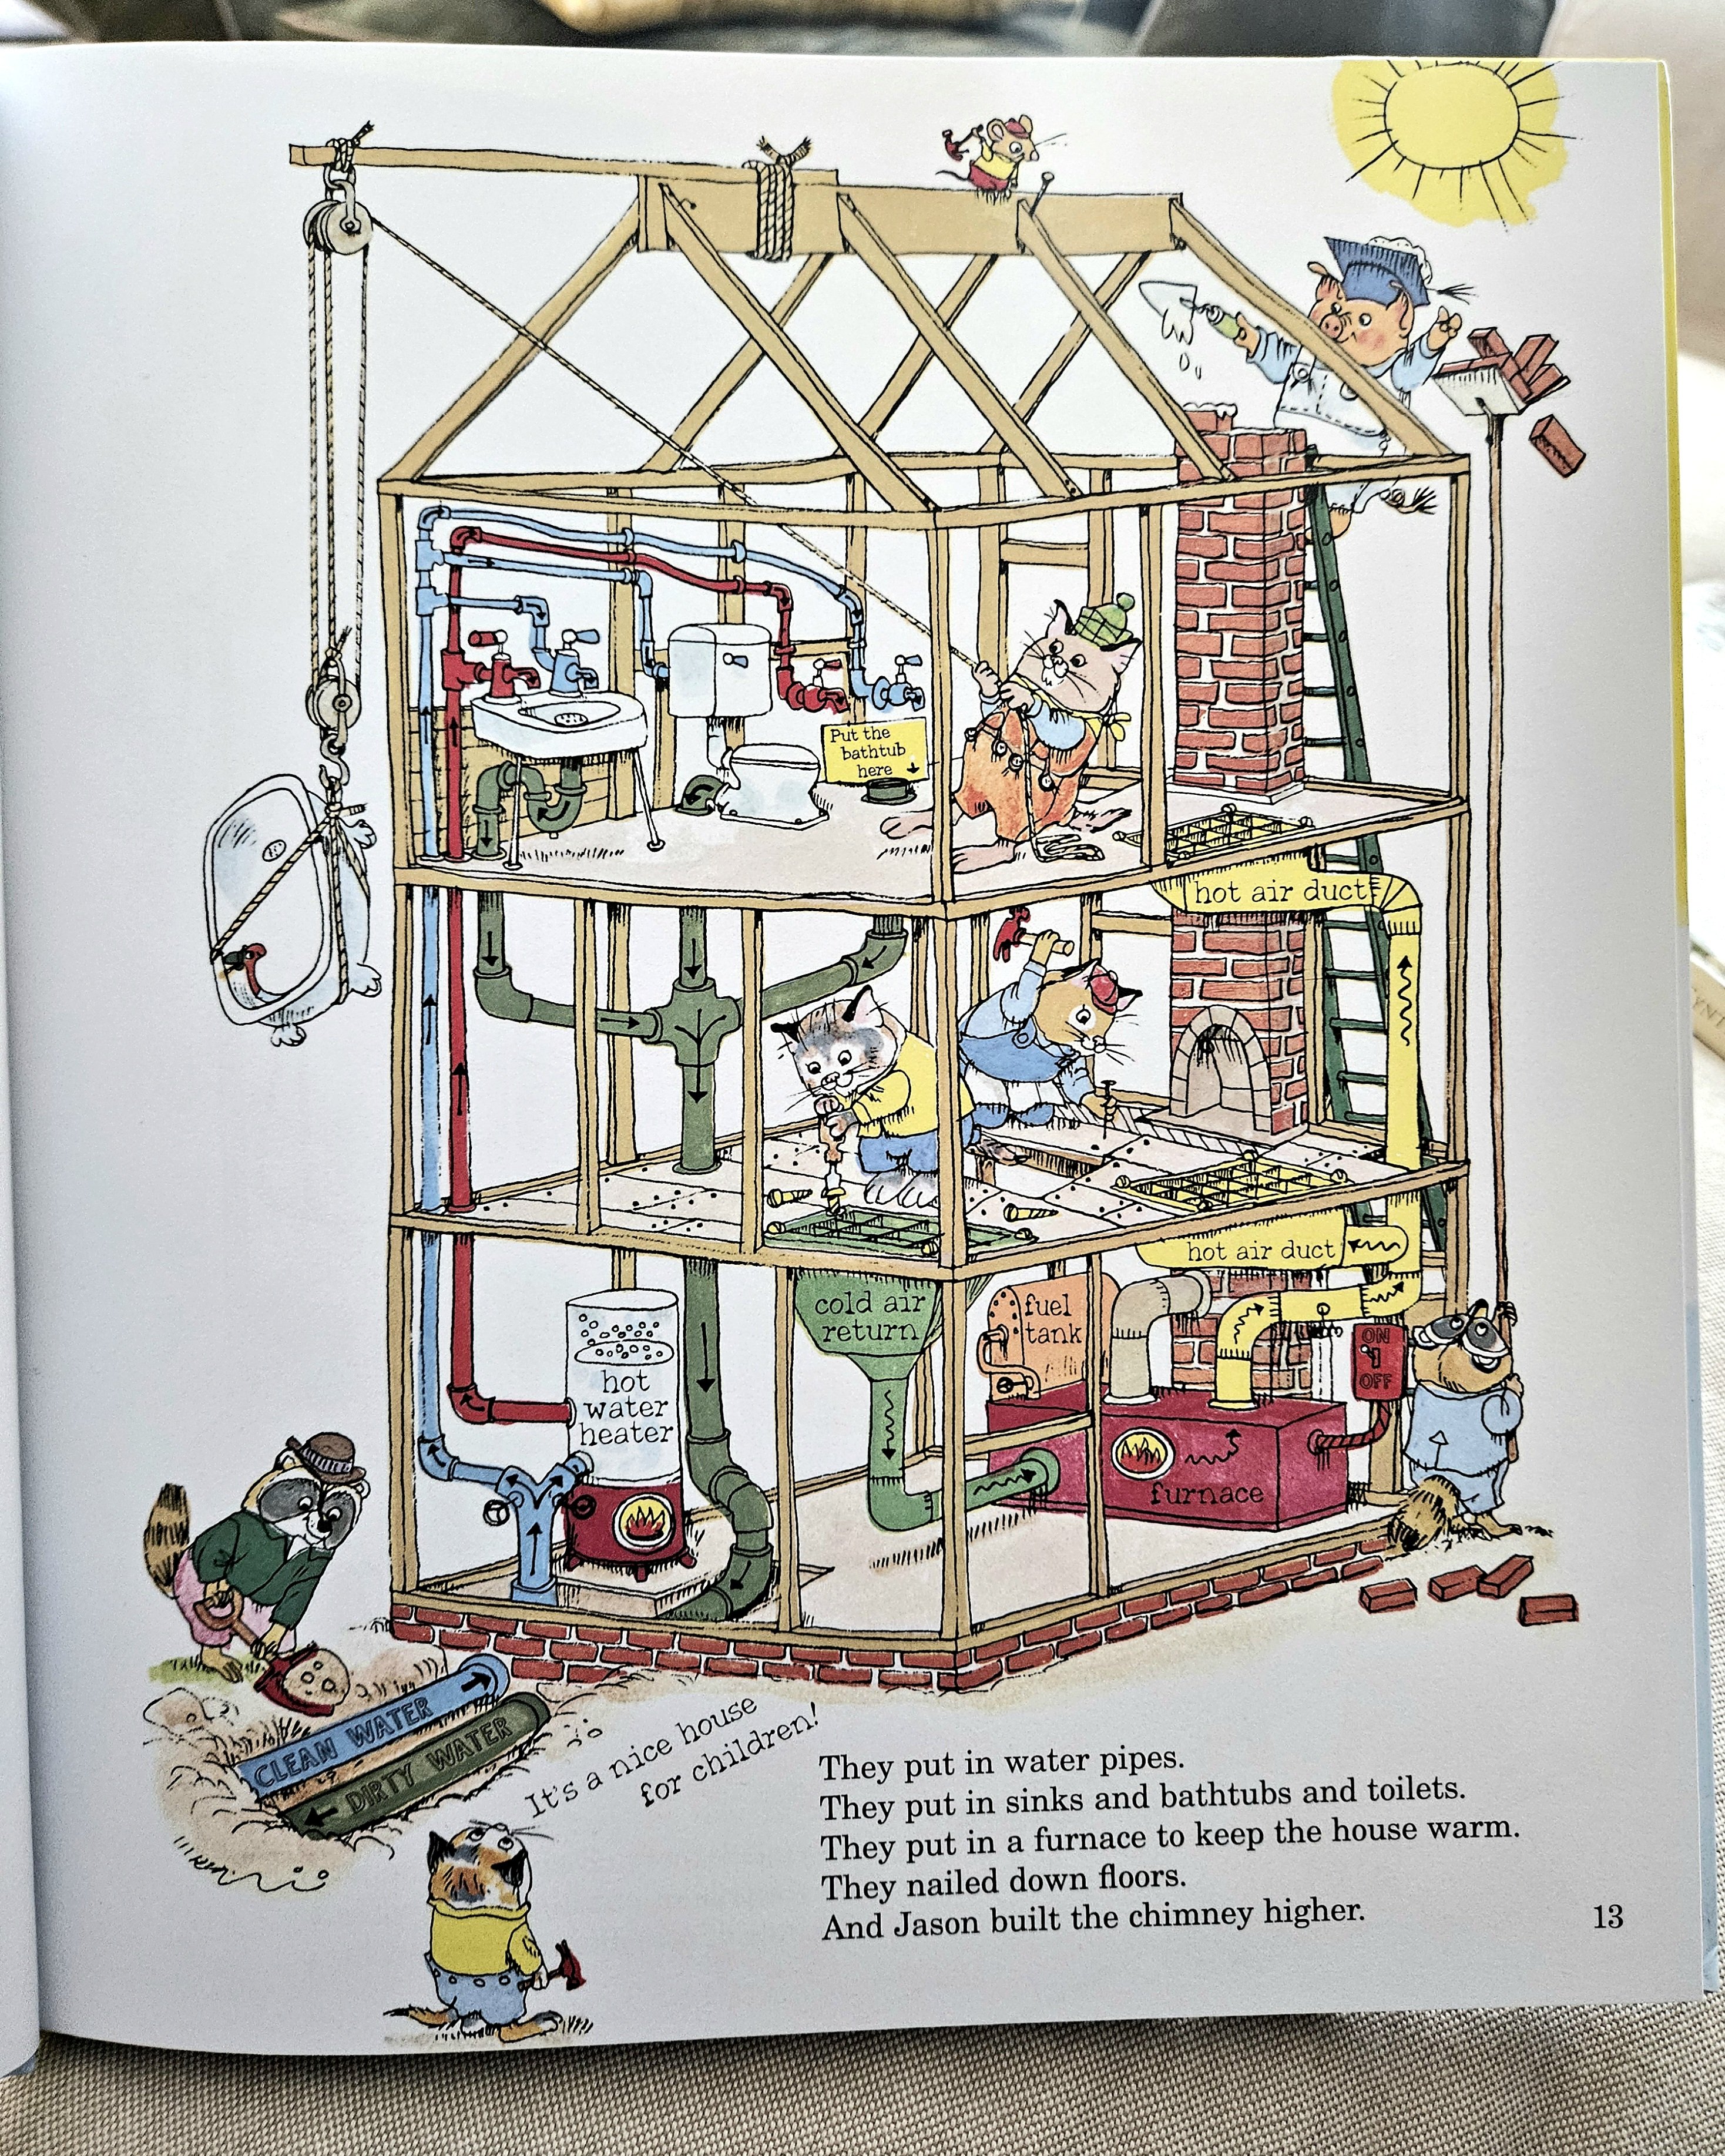 Richard Scarry's message is still an important one – Marin